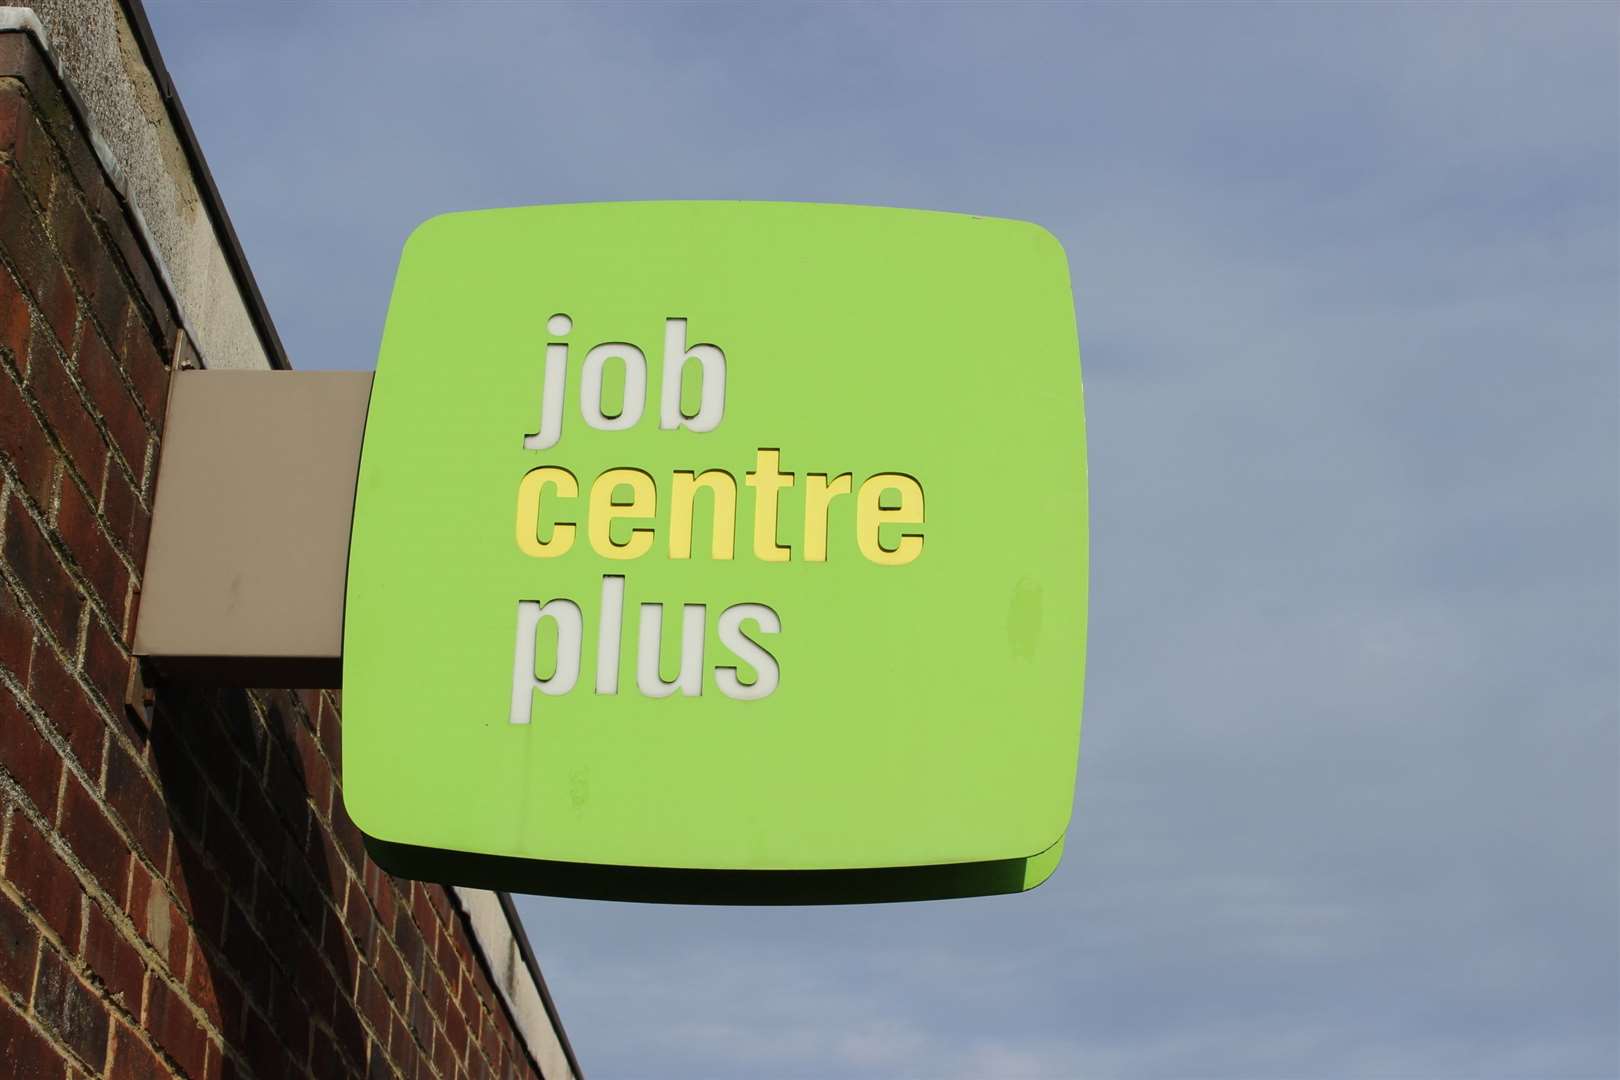 The Jobcentre is to help cater for the increased unemployment brought about by the pandemic